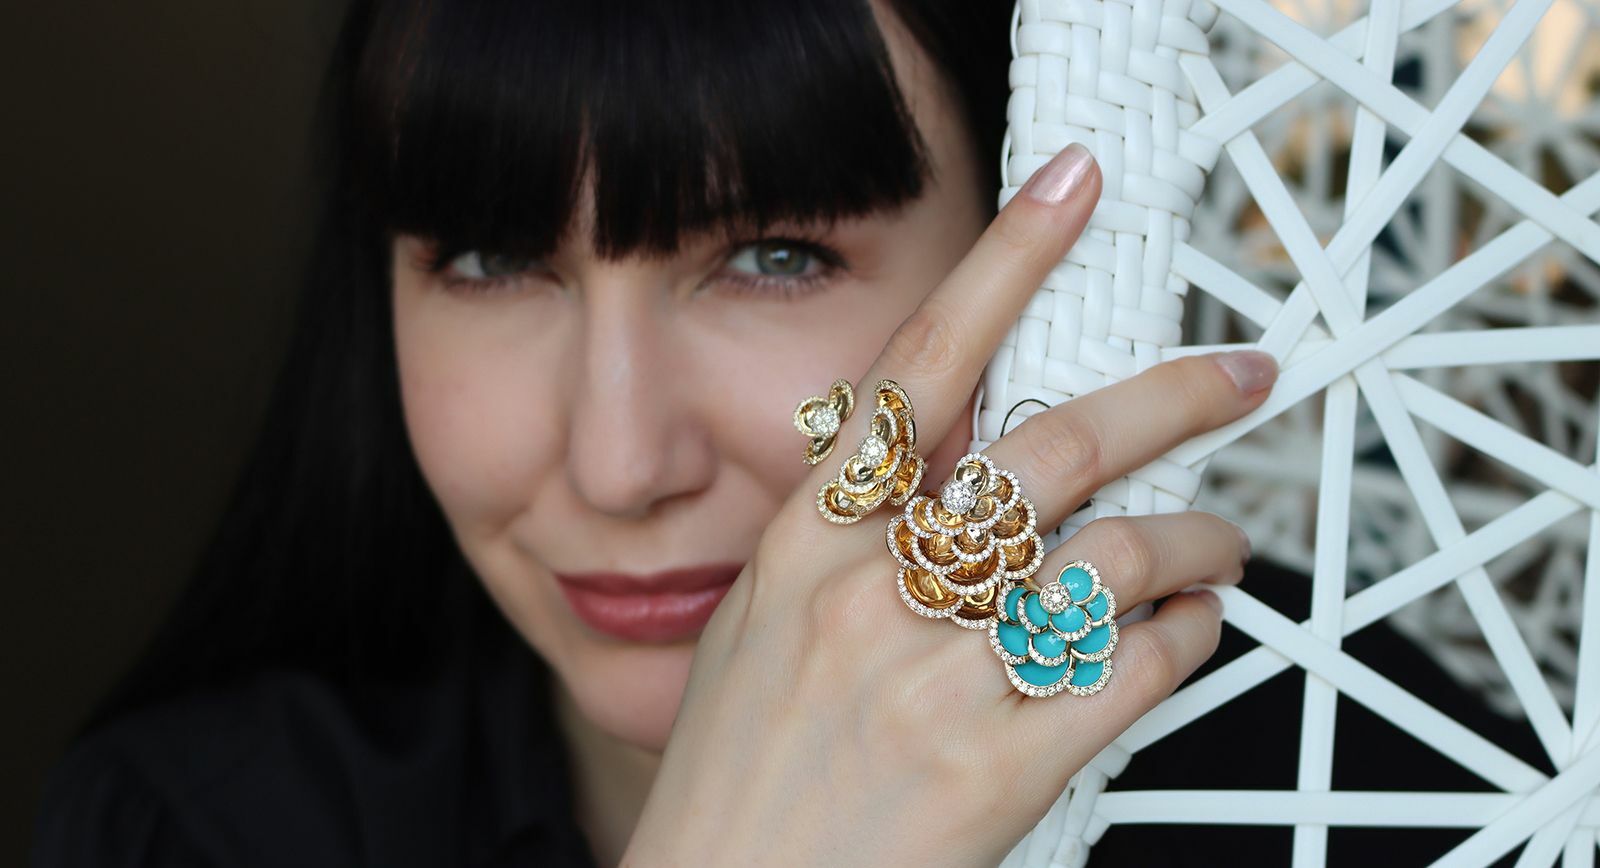 Katerina Perez wears rings from the Petals Collection by FerrariFirenze 